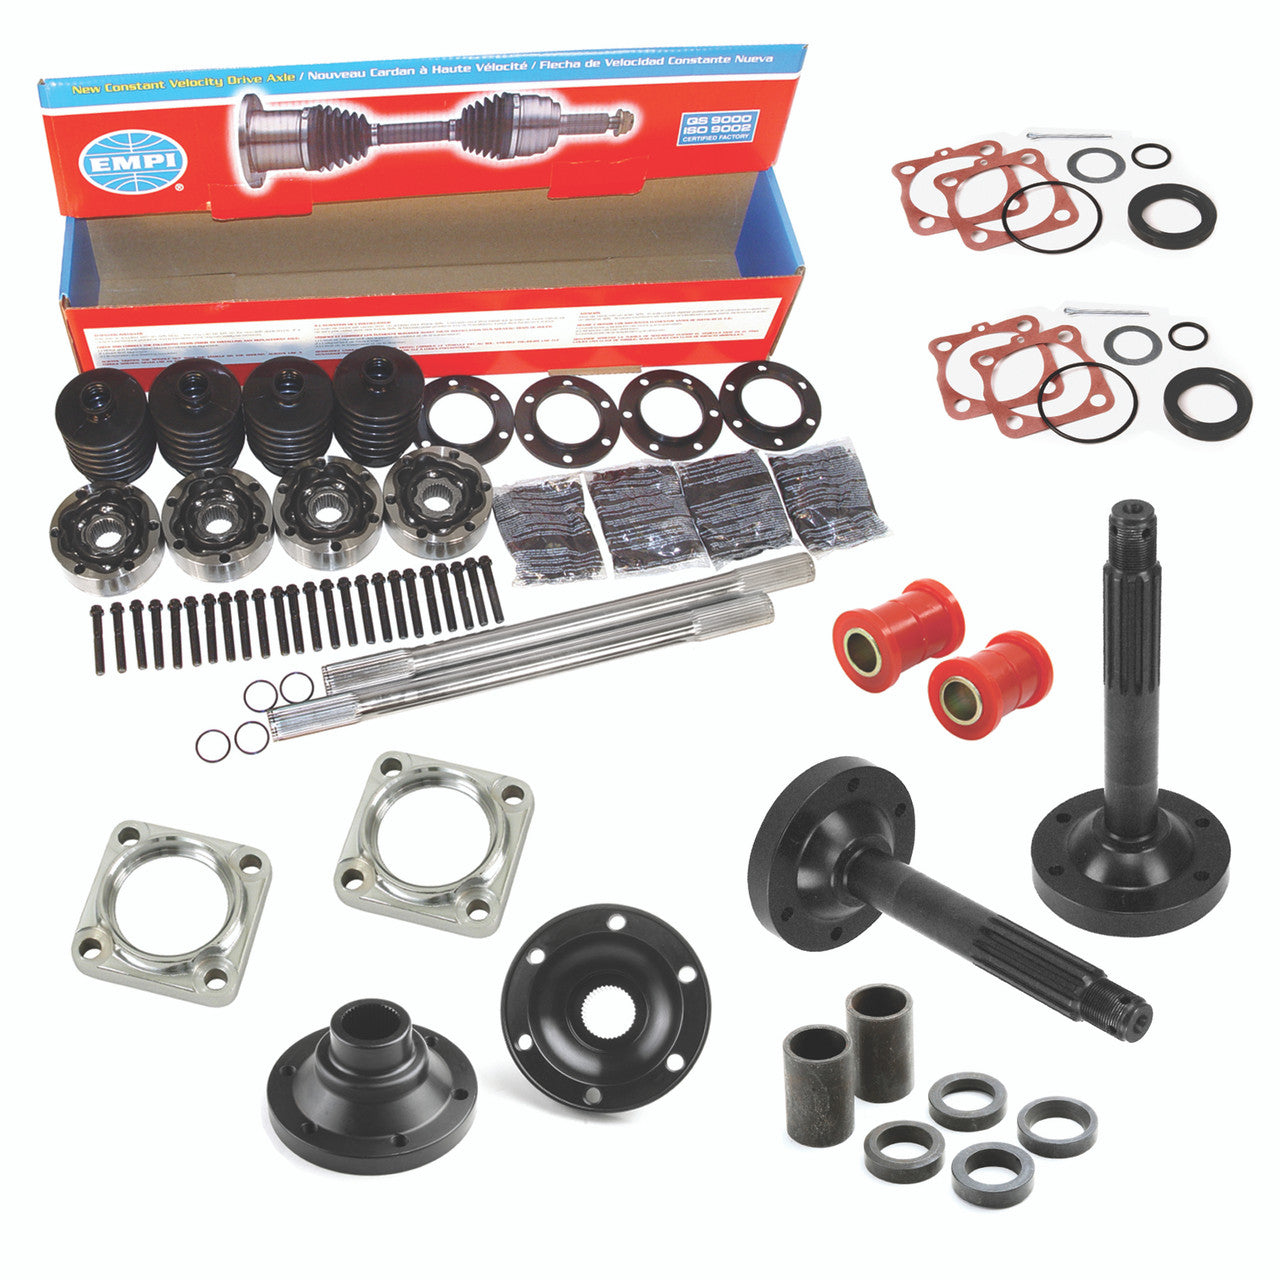 Vw Baja Bug 3X3 Rear Suspension Kit Without Trailing Arms